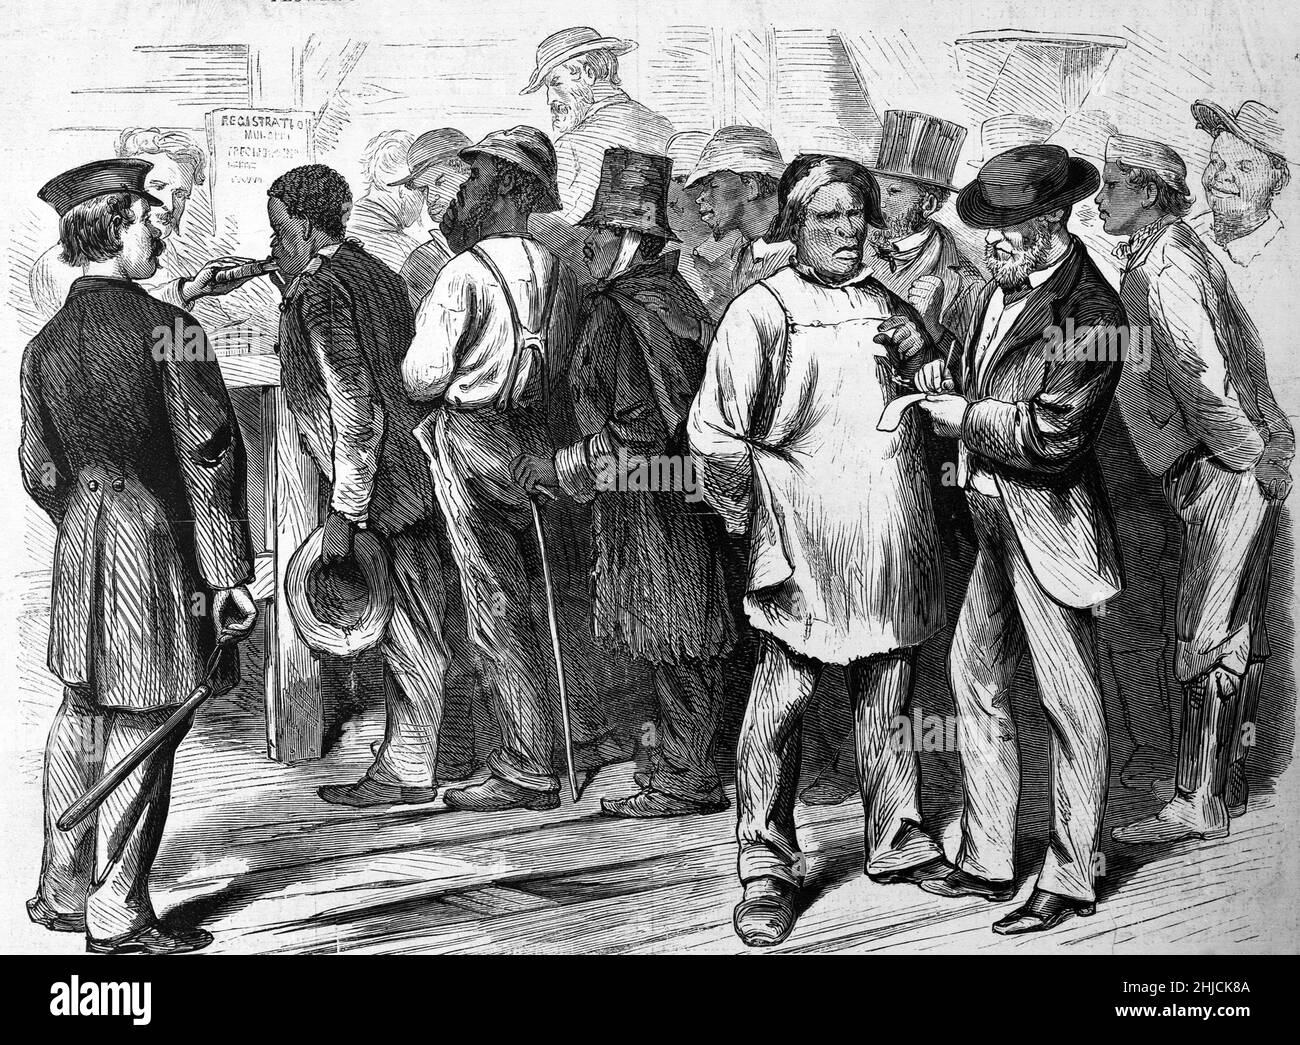 Registration of black male voters during the first municipal election in Richmond, Virginia after the end of the Civil War. Illustration by William Ludwell Sheppard for Harper's Weekly, June 4, 1870. Stock Photo